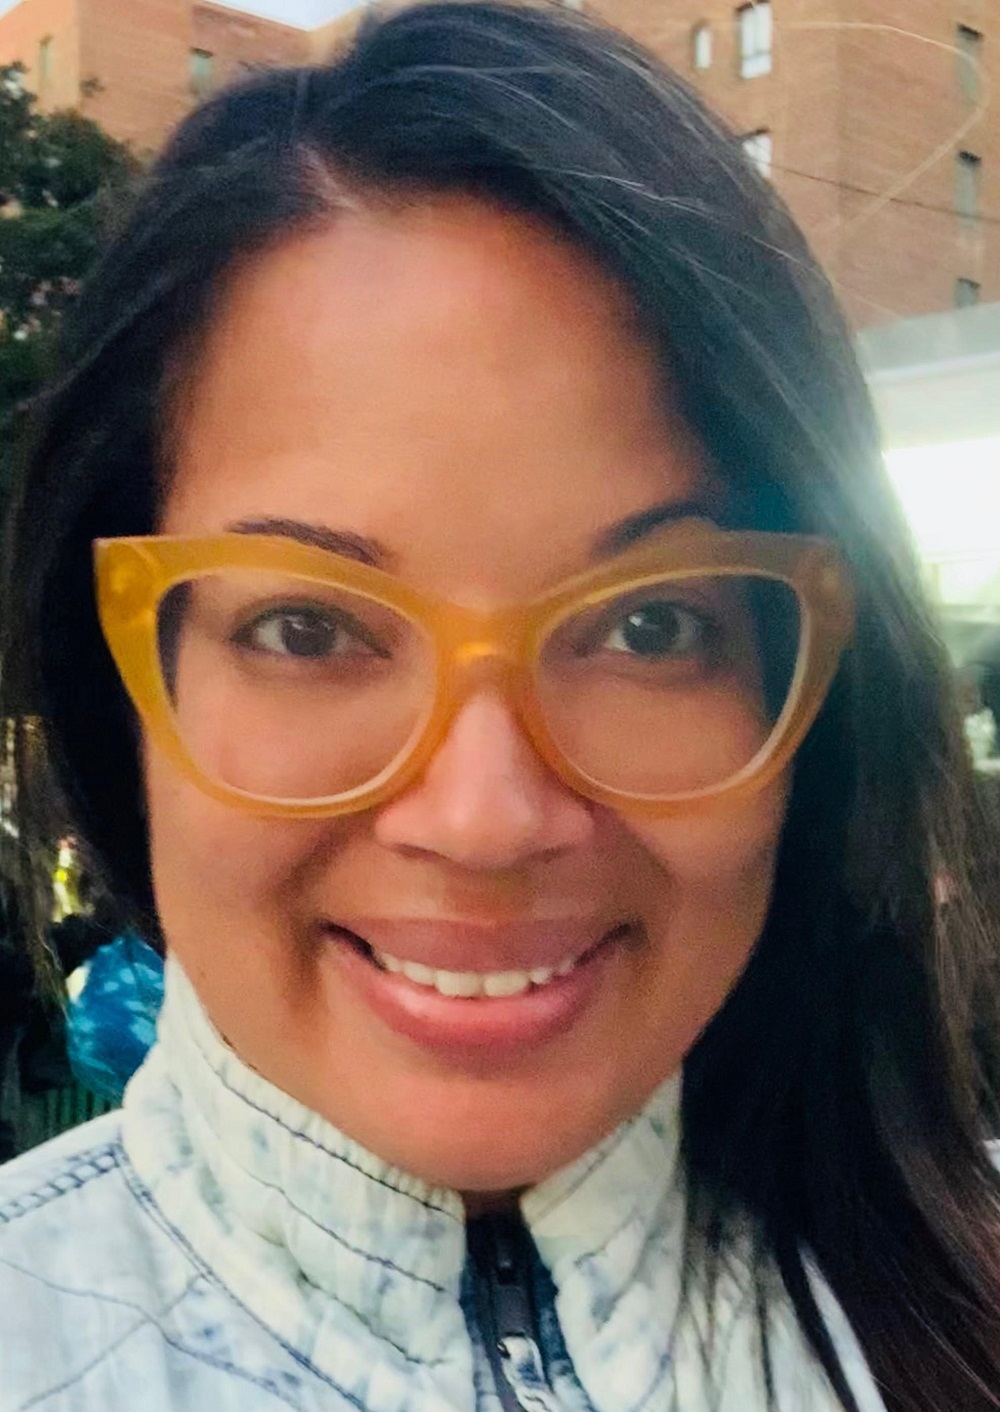 children separated from families due to parental substance use: smiling woman with brightly colored glasses in public setting